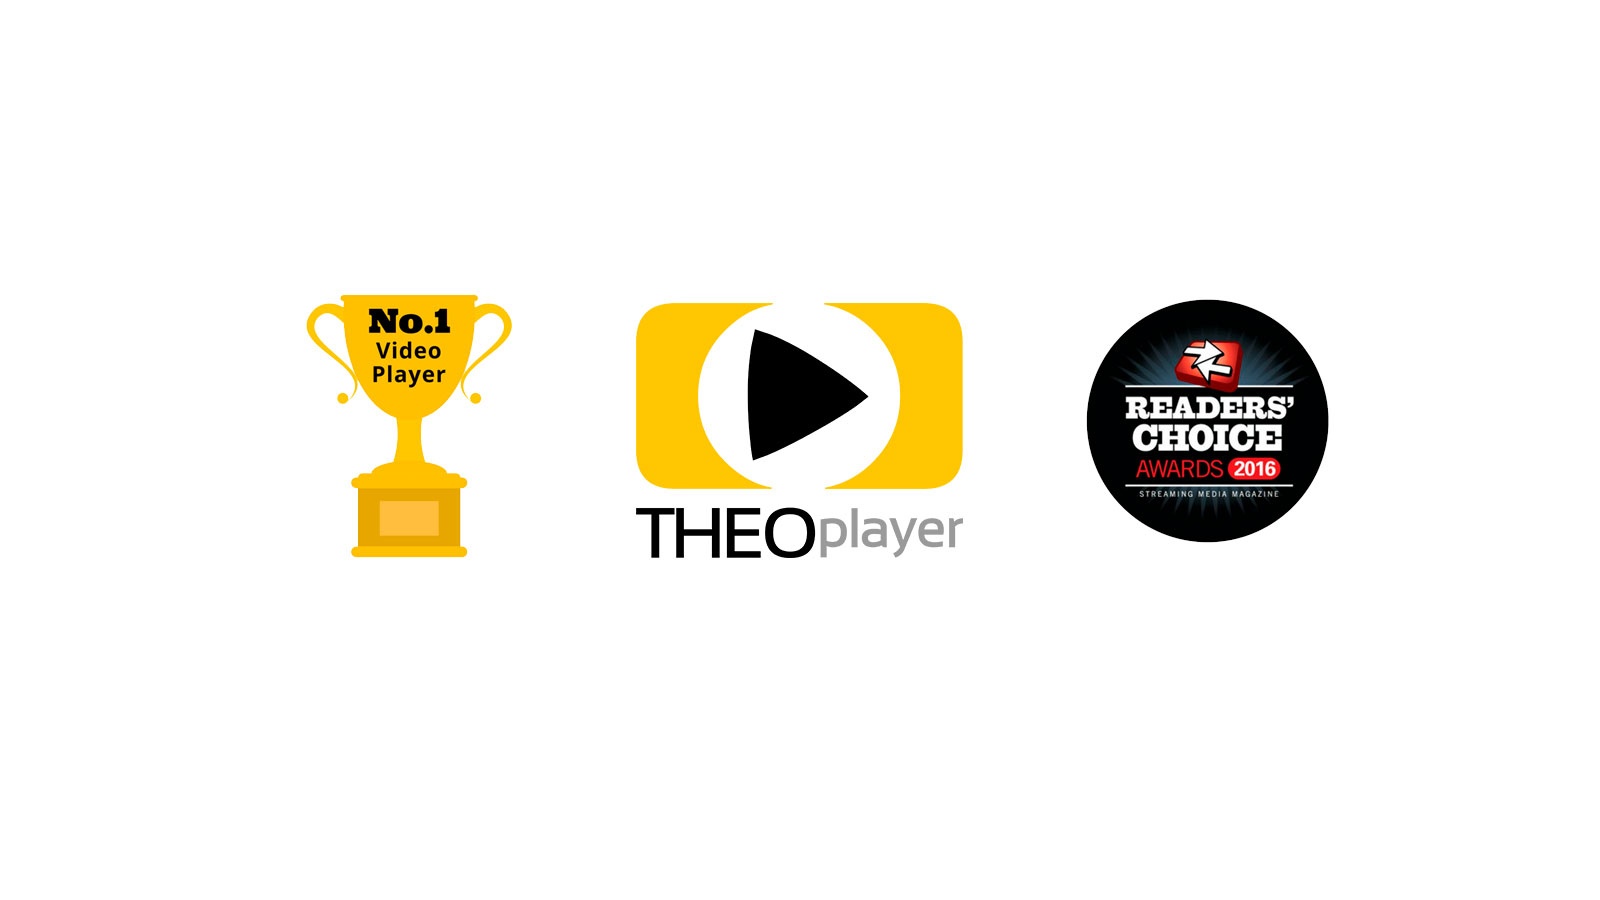 Customers Vote THEOplayer the Best Video Player